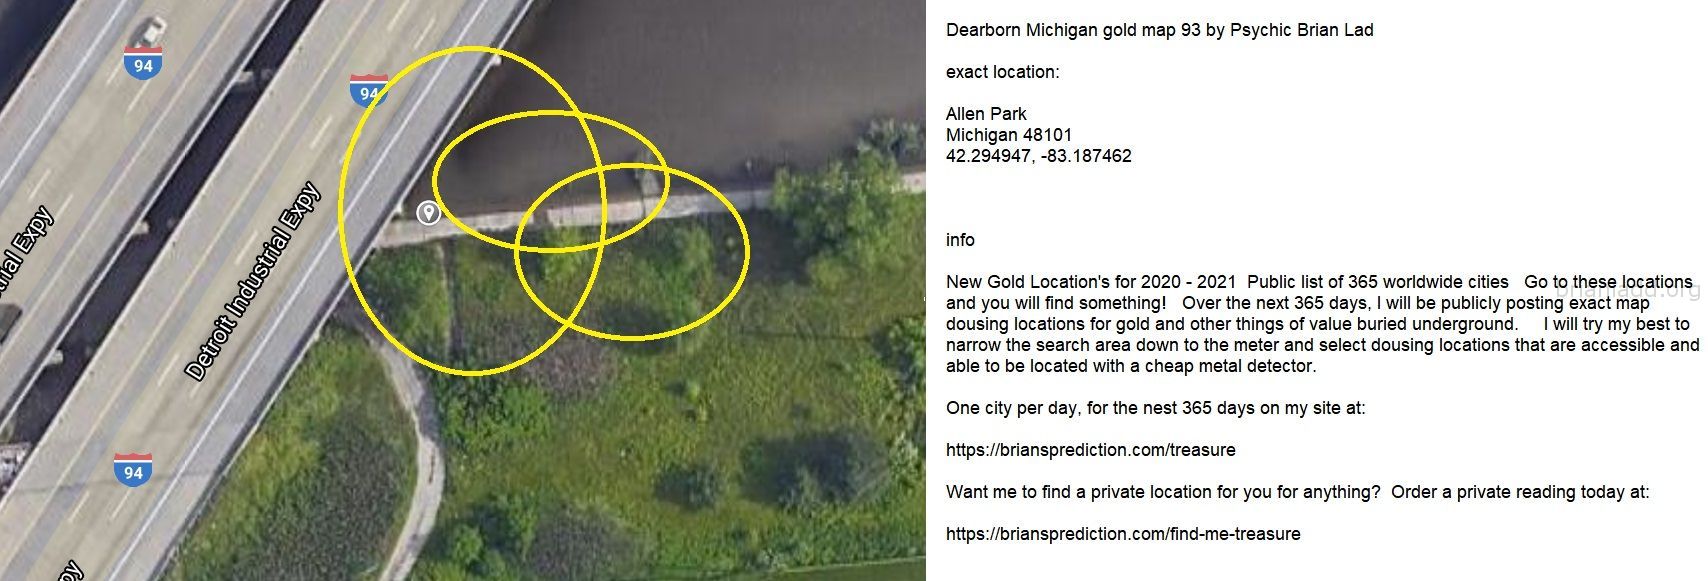 Dearborn Michigan Gold Map 93 By Psychic Brian Ladd - Dearborn Michigan Gold Map 93 By Psychic Brian Ladd  Exact Locatio...
Dearborn Michigan Gold Map 93 By Psychic Brian Ladd  Exact Location:  Allen Park  Michigan 48101  42.294947, -83.187462  Info  New Gold Location'S For 2020 - 2021  Public List Of 365 Worldwide Cities  Go To These Locations And You Will Find Something!  Over The Next 365 Days, I Will Be Publicly Posting Exact Map Dousing Locations For Gold And Other Things Of Value Buried Underground.  I Will Try My Best To Narrow The Search Area Down To The Meter And Select Dousing Locations That Are Accessible And Able To Be Located With A Cheap Metal Detector.  One City Per Day, For The Nest 365 Days On My Site At:   https://briansprediction.com/Treasure  Want Me To Find A Private Location For You For Anything?  Order A Private Reading Today At:   https://briansprediction.com/Find-Me-Treasure
